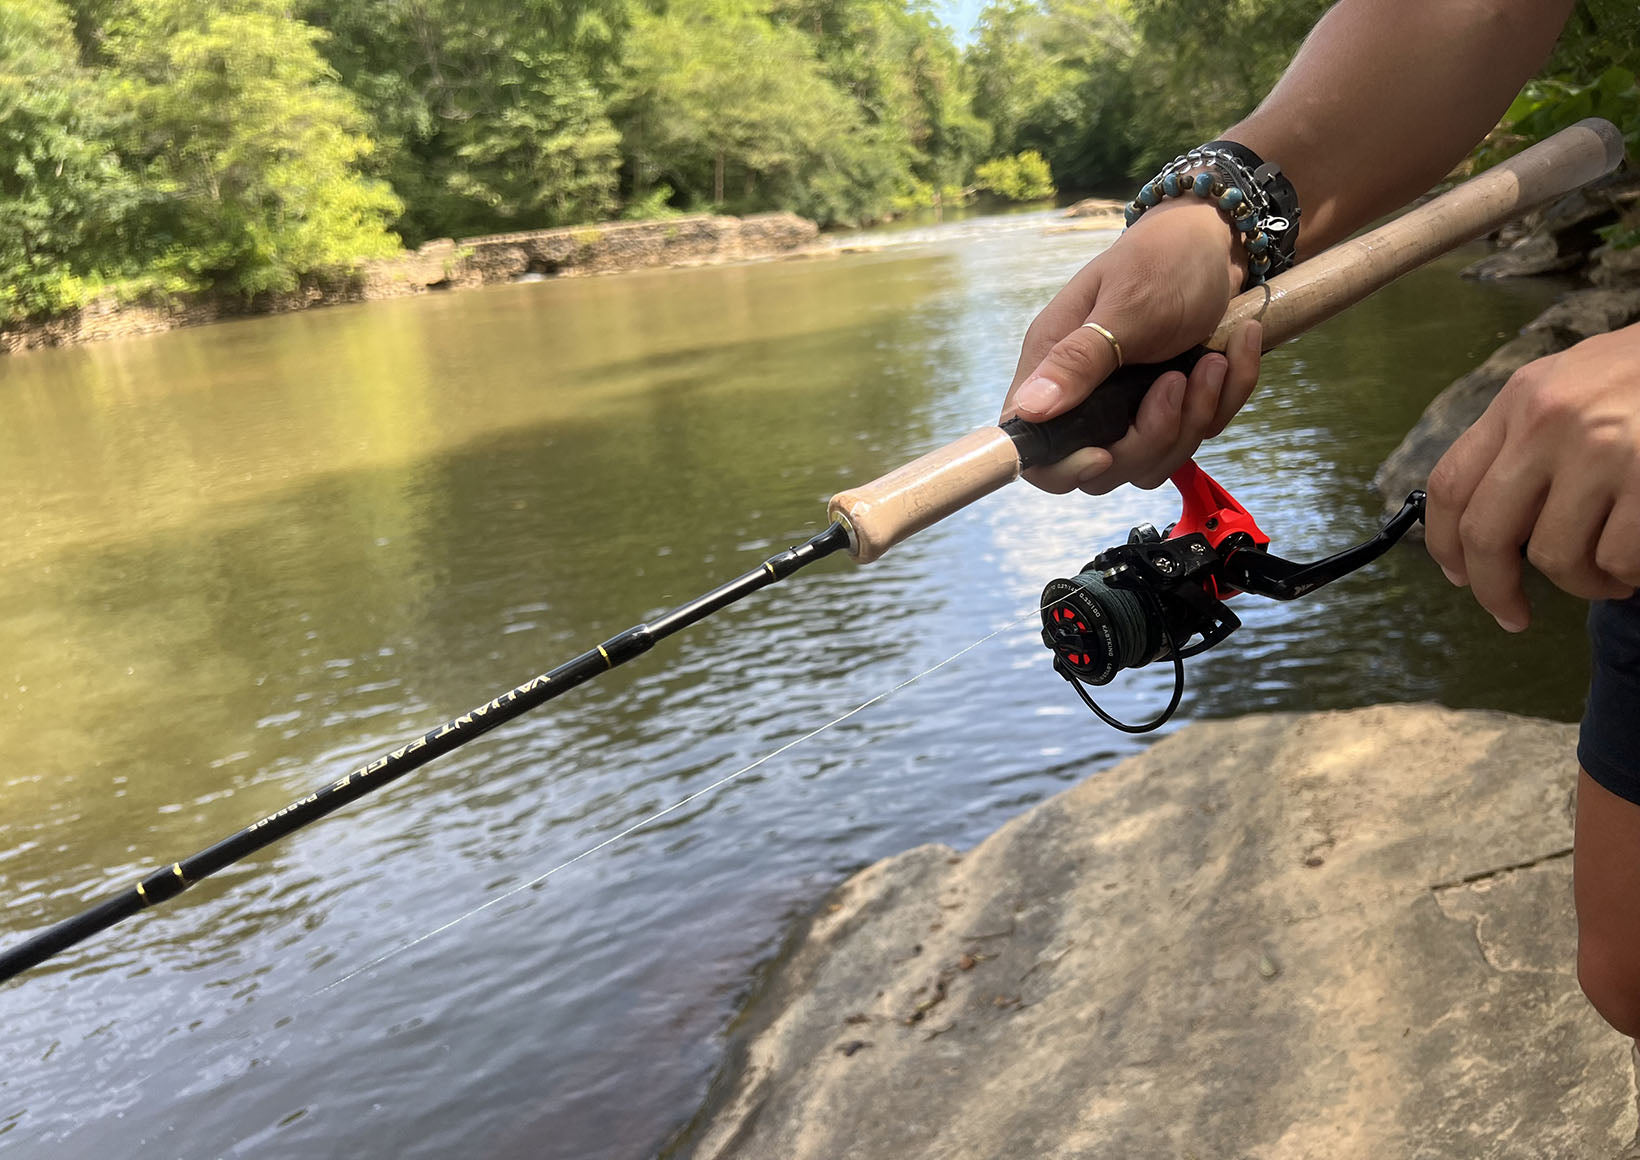 Creek Fishing with the New KastKing Valiant Eagle Spinning Reel 